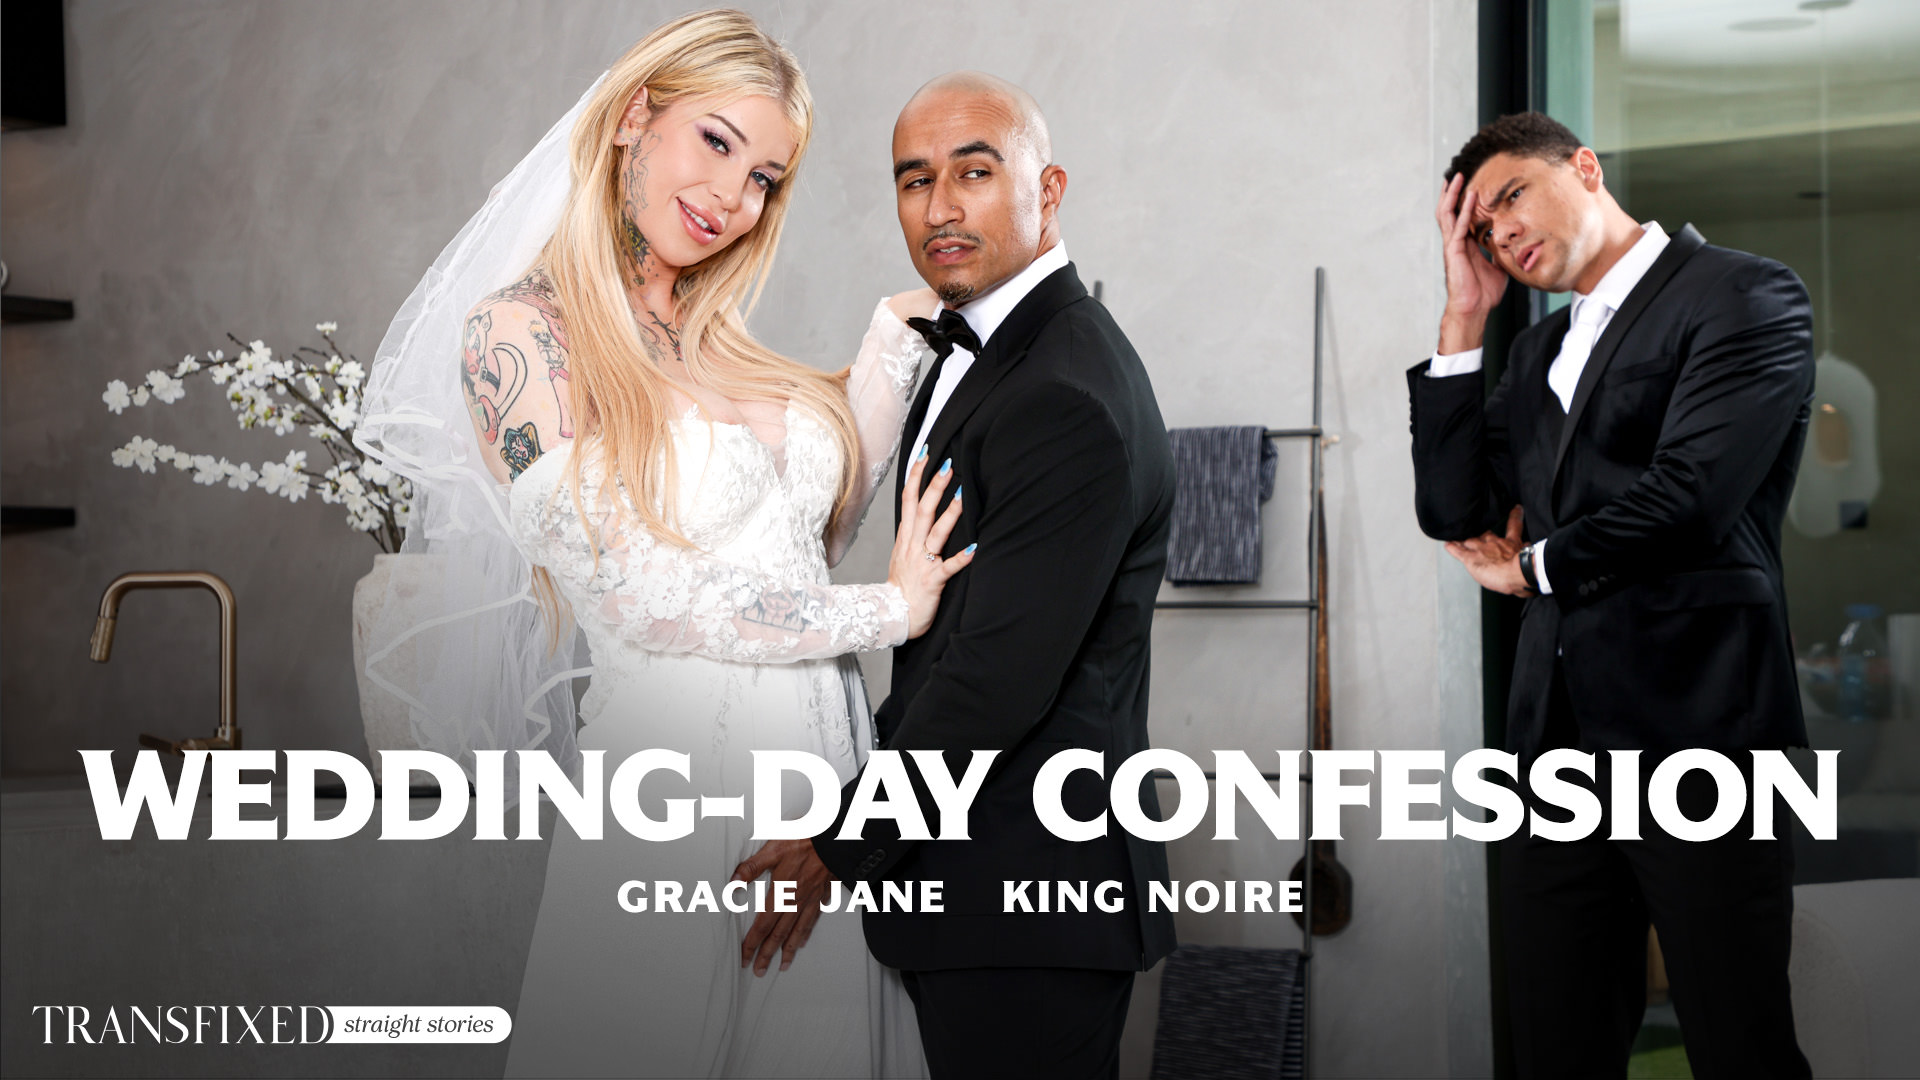 Transfixed Gracie Jane, King Noire Wedding-Day Confession